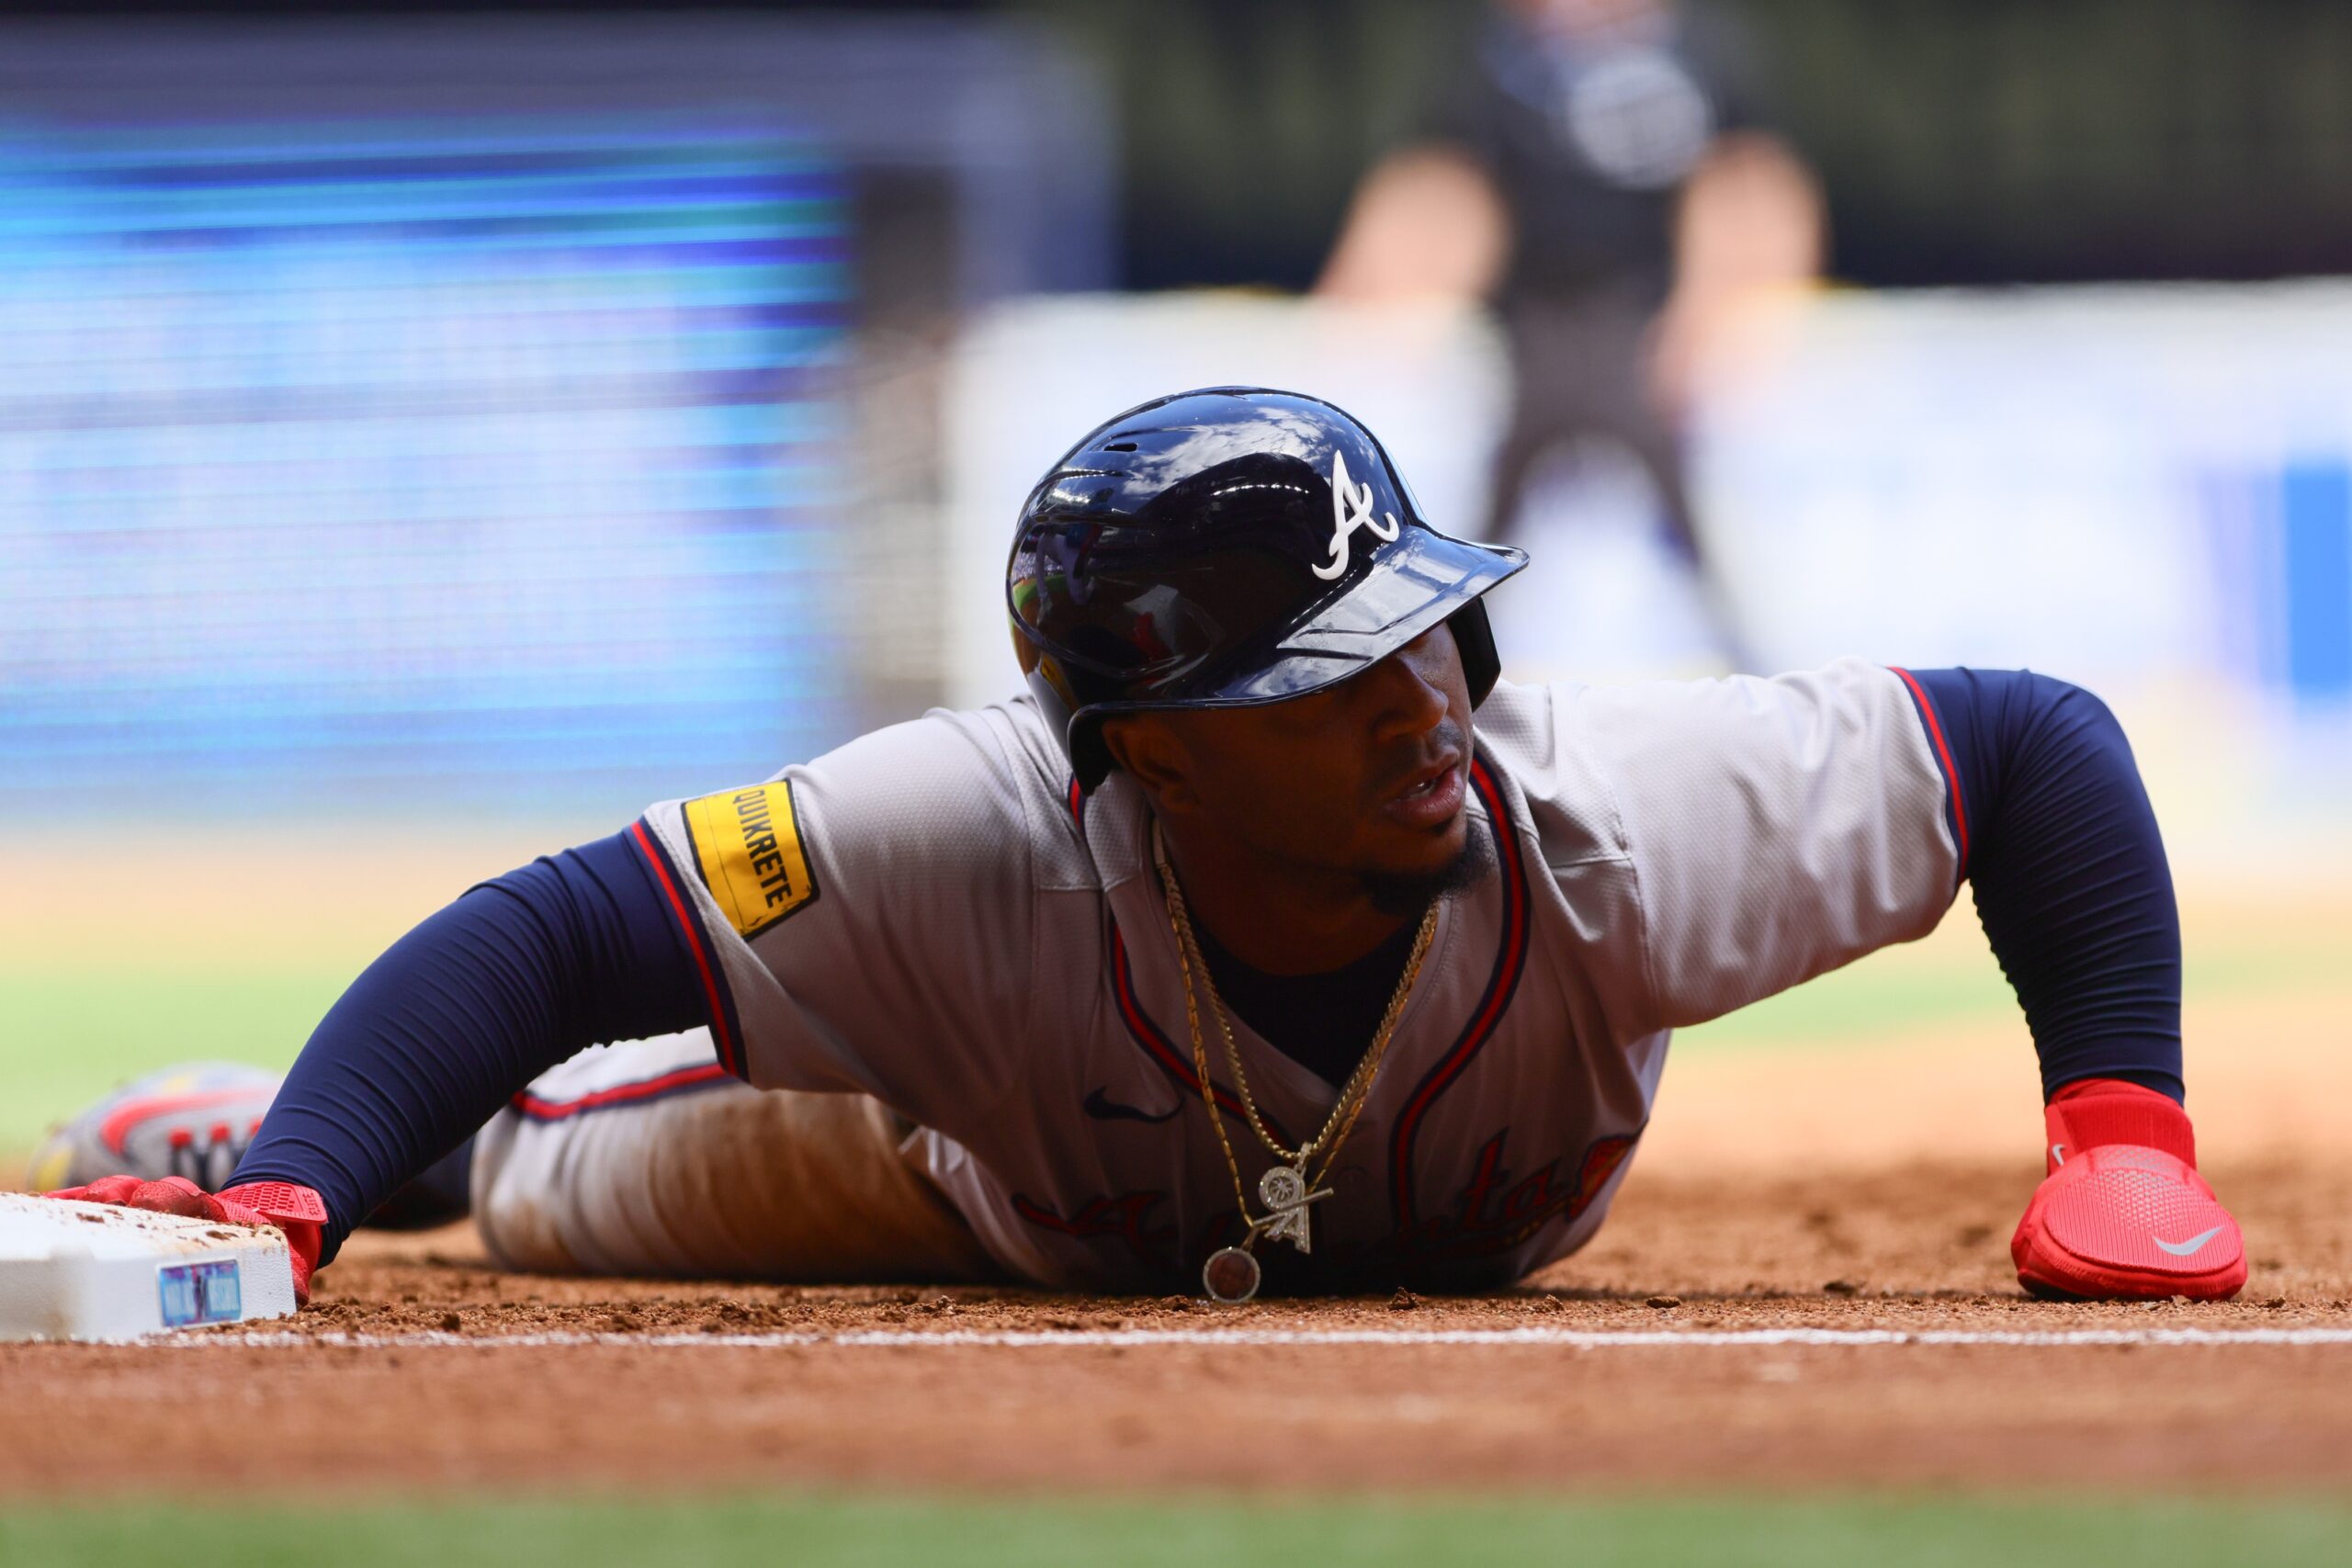 Braves All-Star Second Baseman Could Return as Soon as Friday